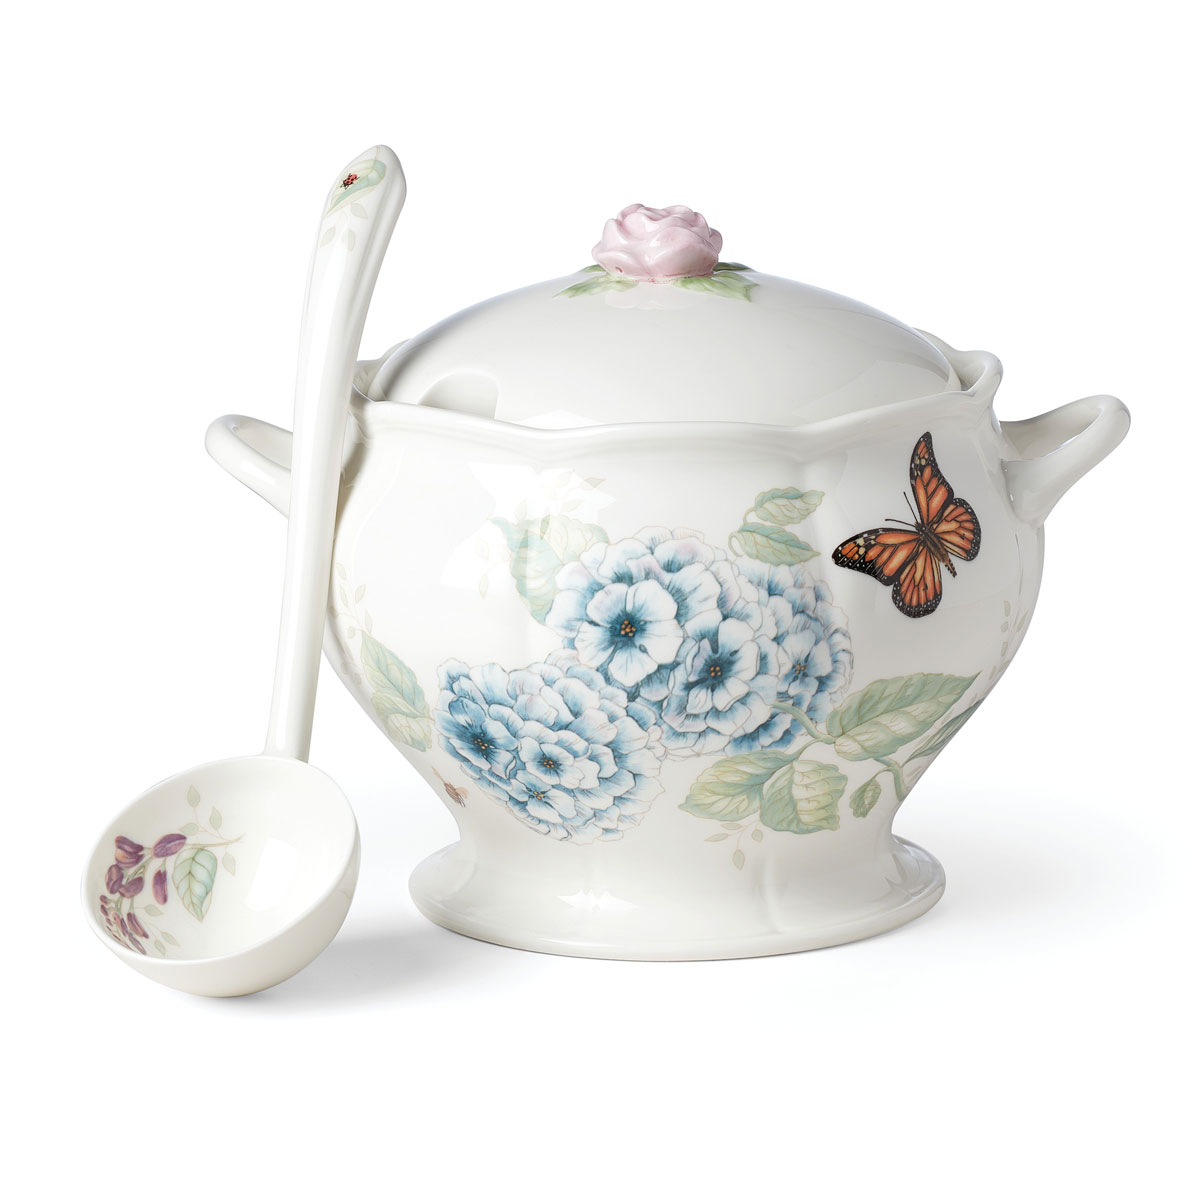 Lenox Butterfly Meadow China Tureen and Ladle Soup Set